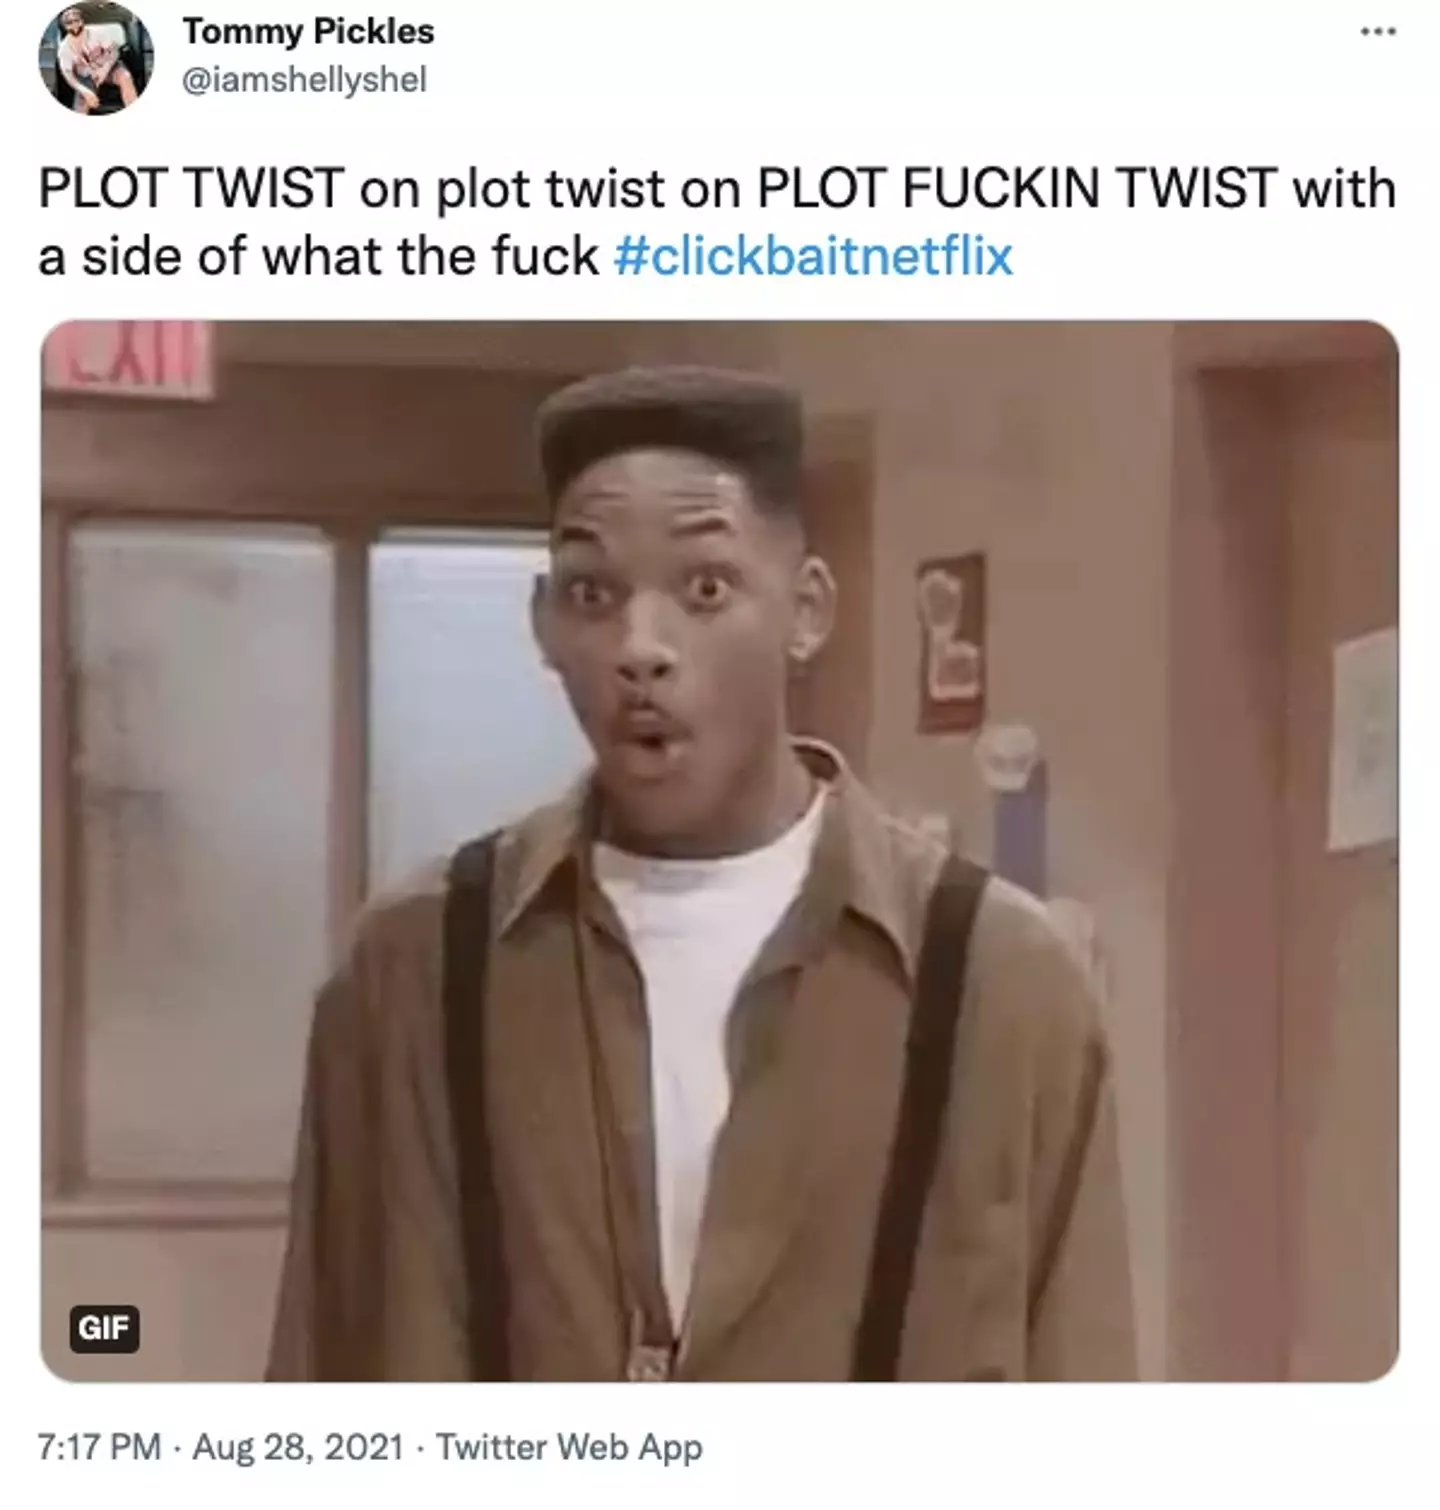 There are numerous plot twists. (